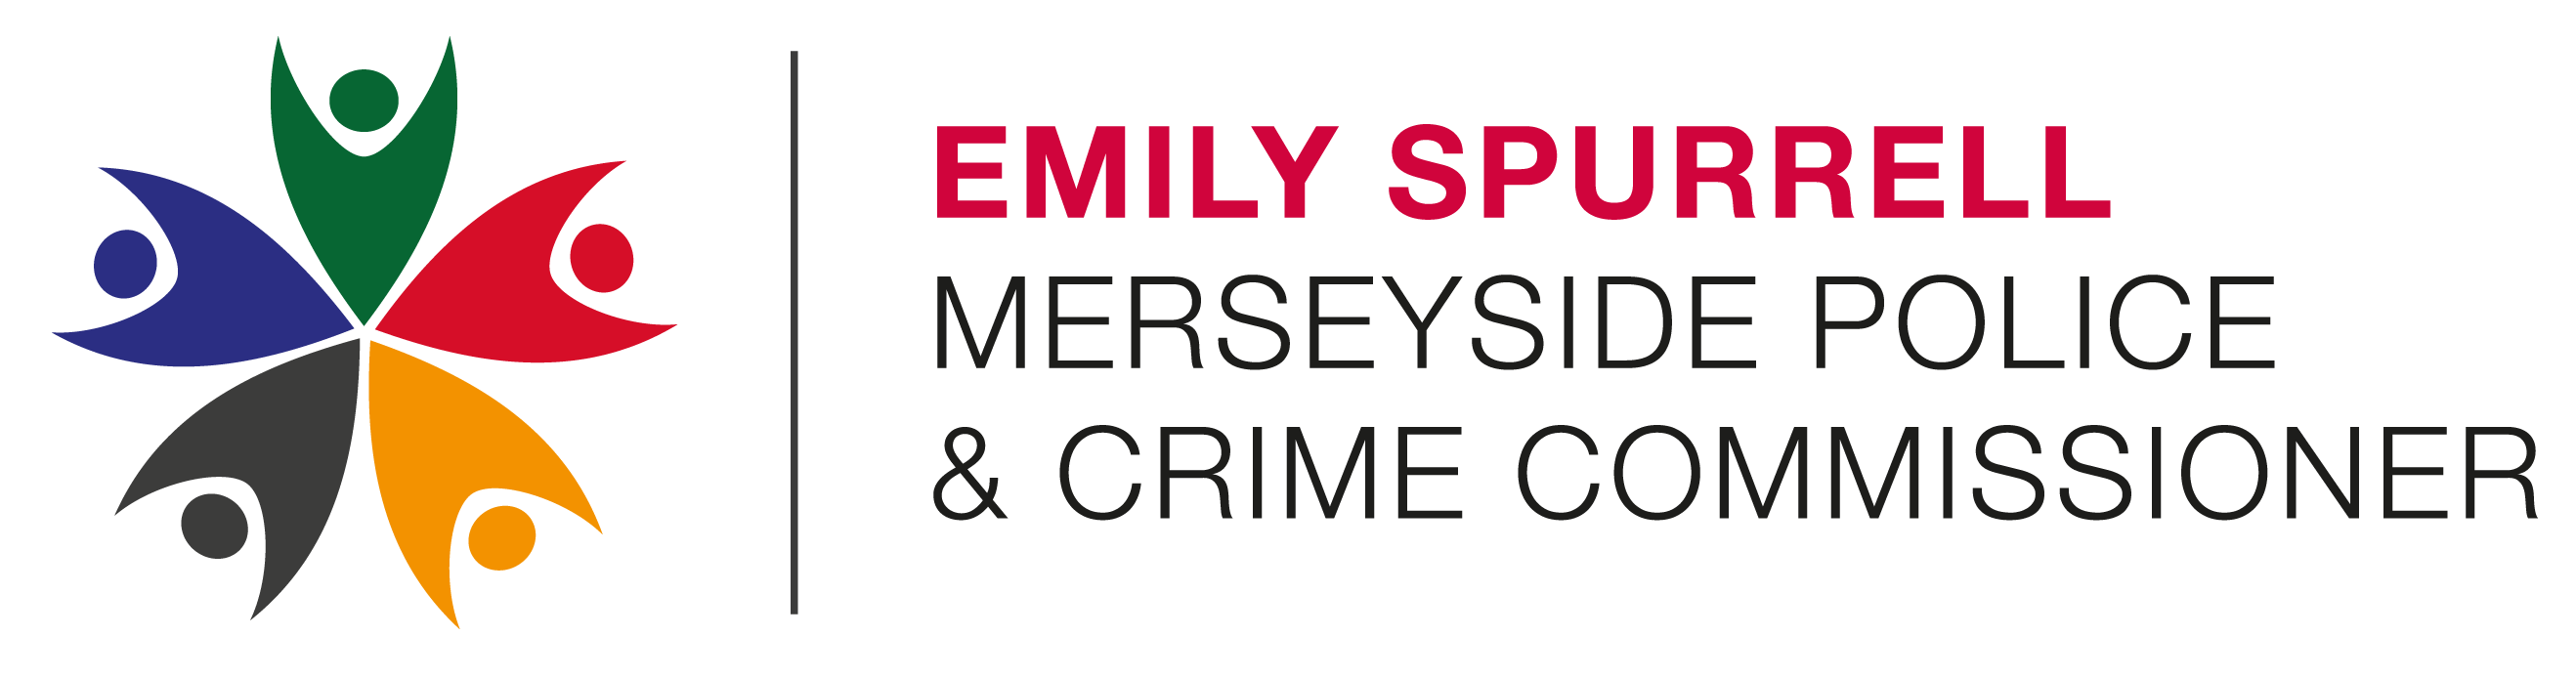 Emily Spurrell, Merseyside Police and Crime Commissioner